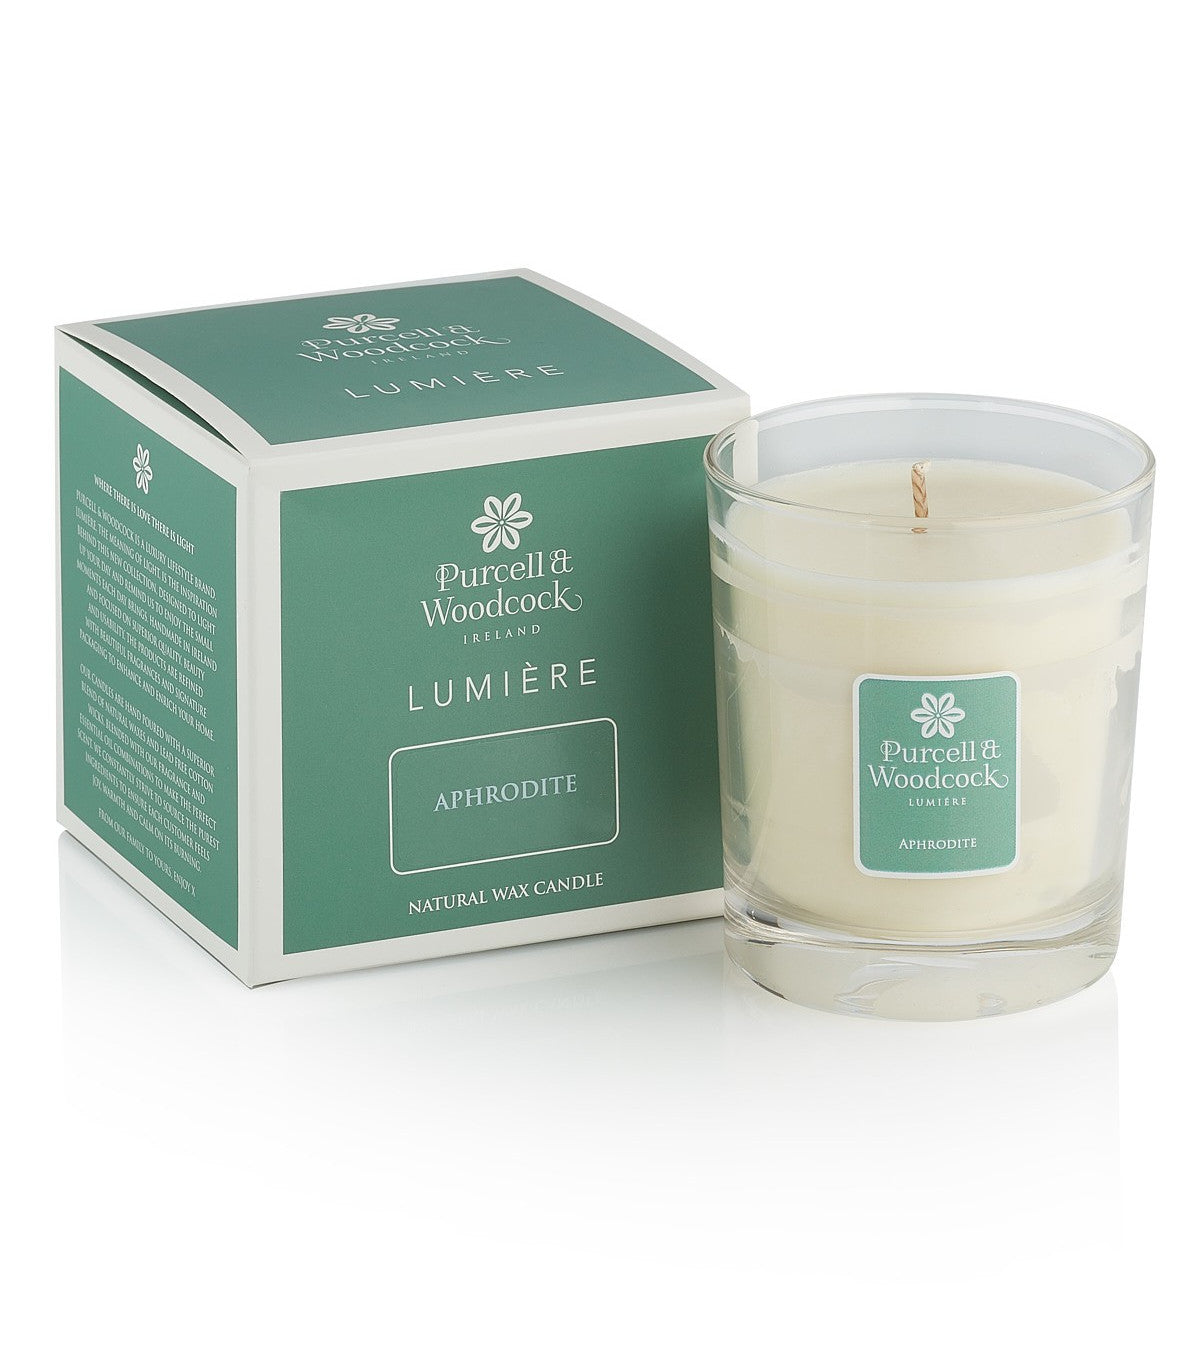 Purcell & Woodcock Lumiére Aphrodite Candle